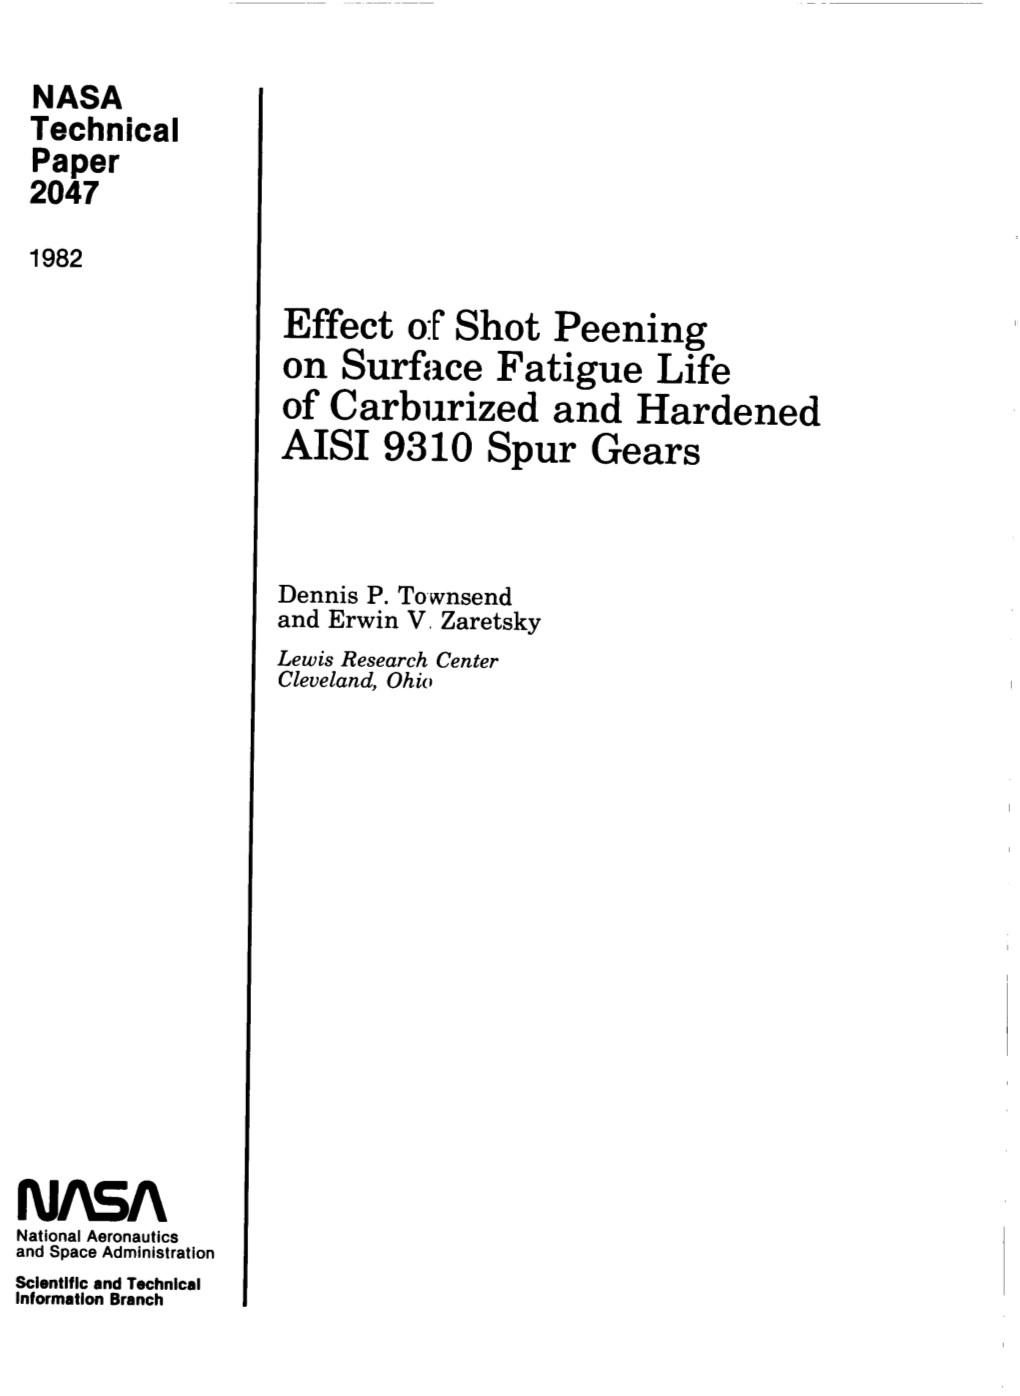 Effect of Shot Peening on Surfiwe Fatigue Life of Carburized and Hardened AIS1 9310 Spur Gears